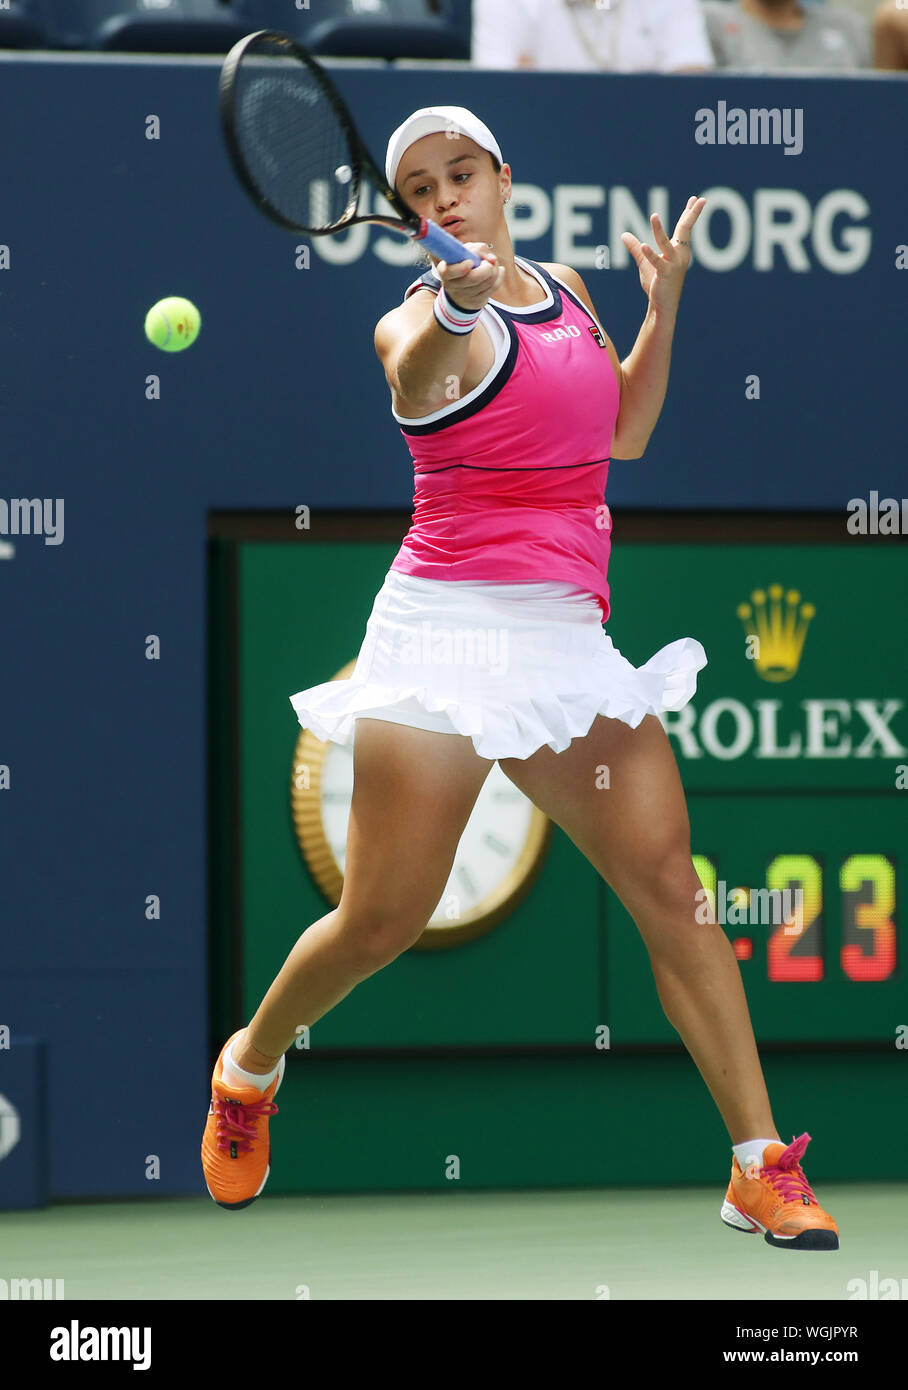 New York, United States. 01st Sep, 2019. Ashleigh Barty of Australia hits a forehand to Qiang Wang of China in the first set of the fourth round match at the 2019 US Open Tennis Championships at the USTA Billie Jean King National Tennis Center on Sunday, September 1, 2019 in New York City. Wang won 6-2, 6-4. Photo by Monika Graff/UPI Credit: UPI/Alamy Live News Stock Photo